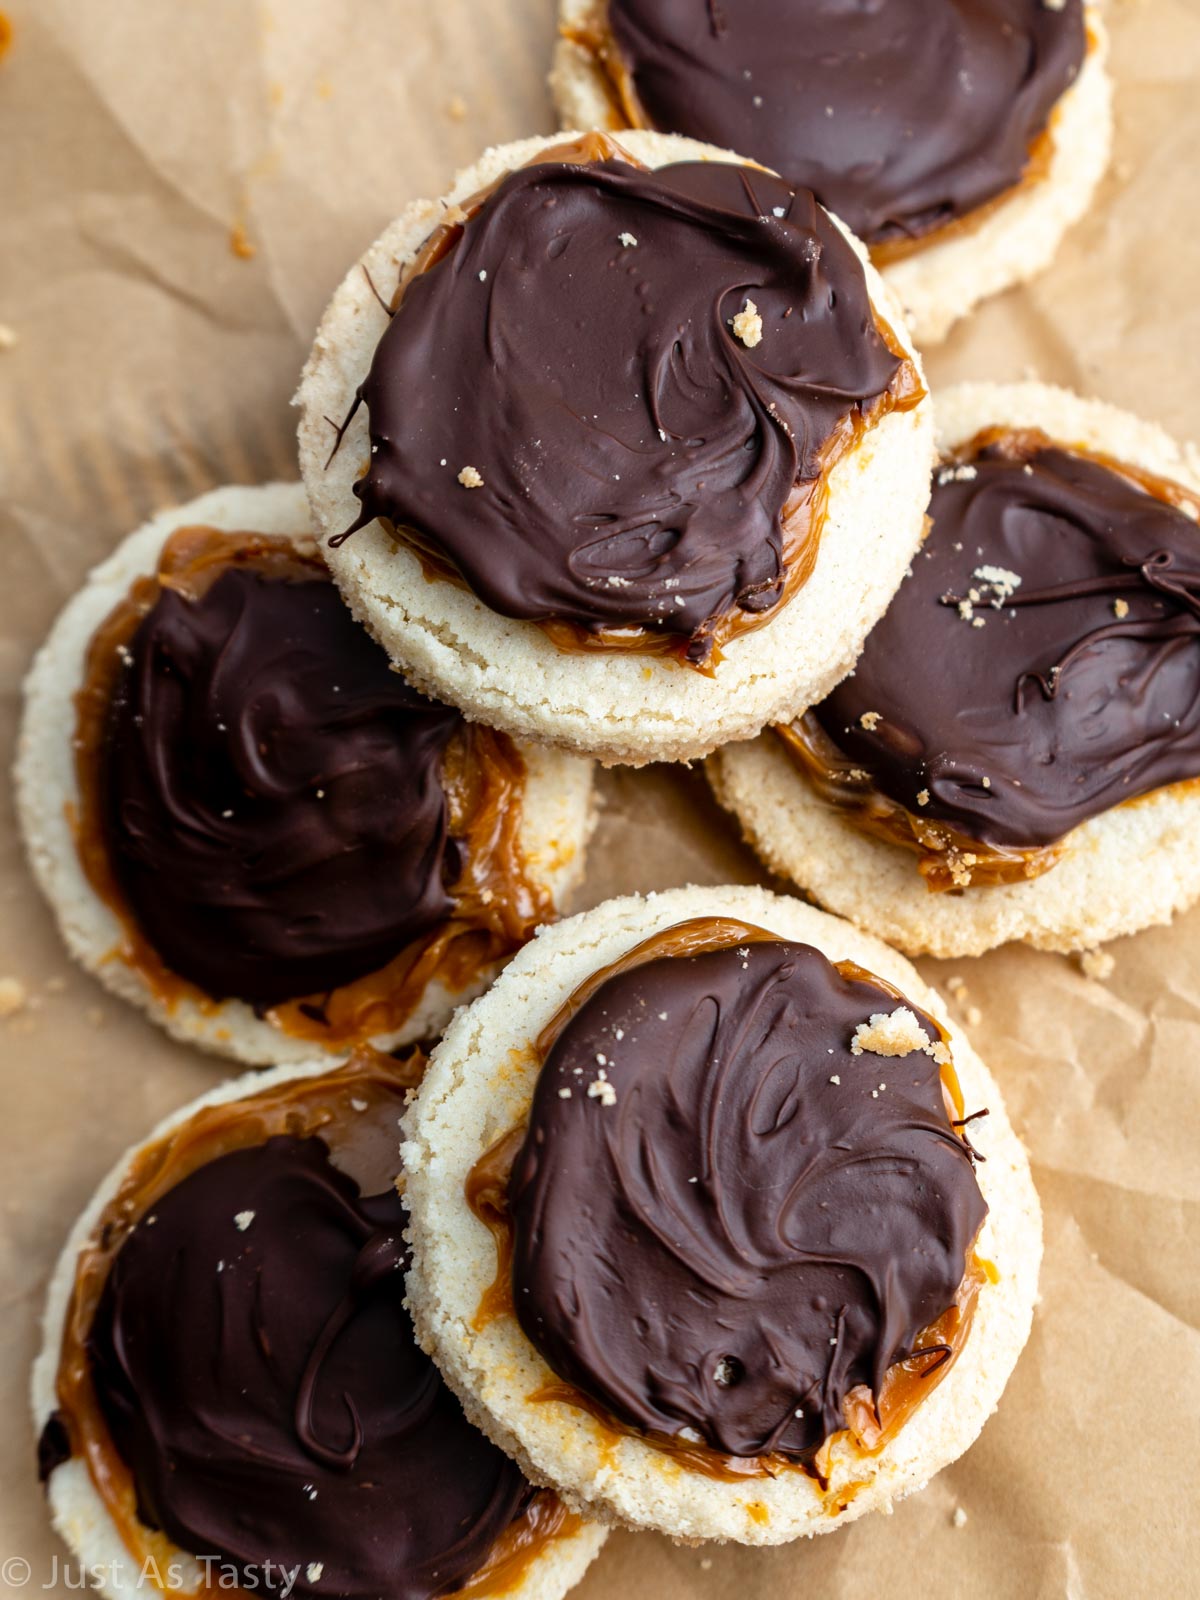 Pile of gluten free shortbread cookies topped with chocolate and caramel.